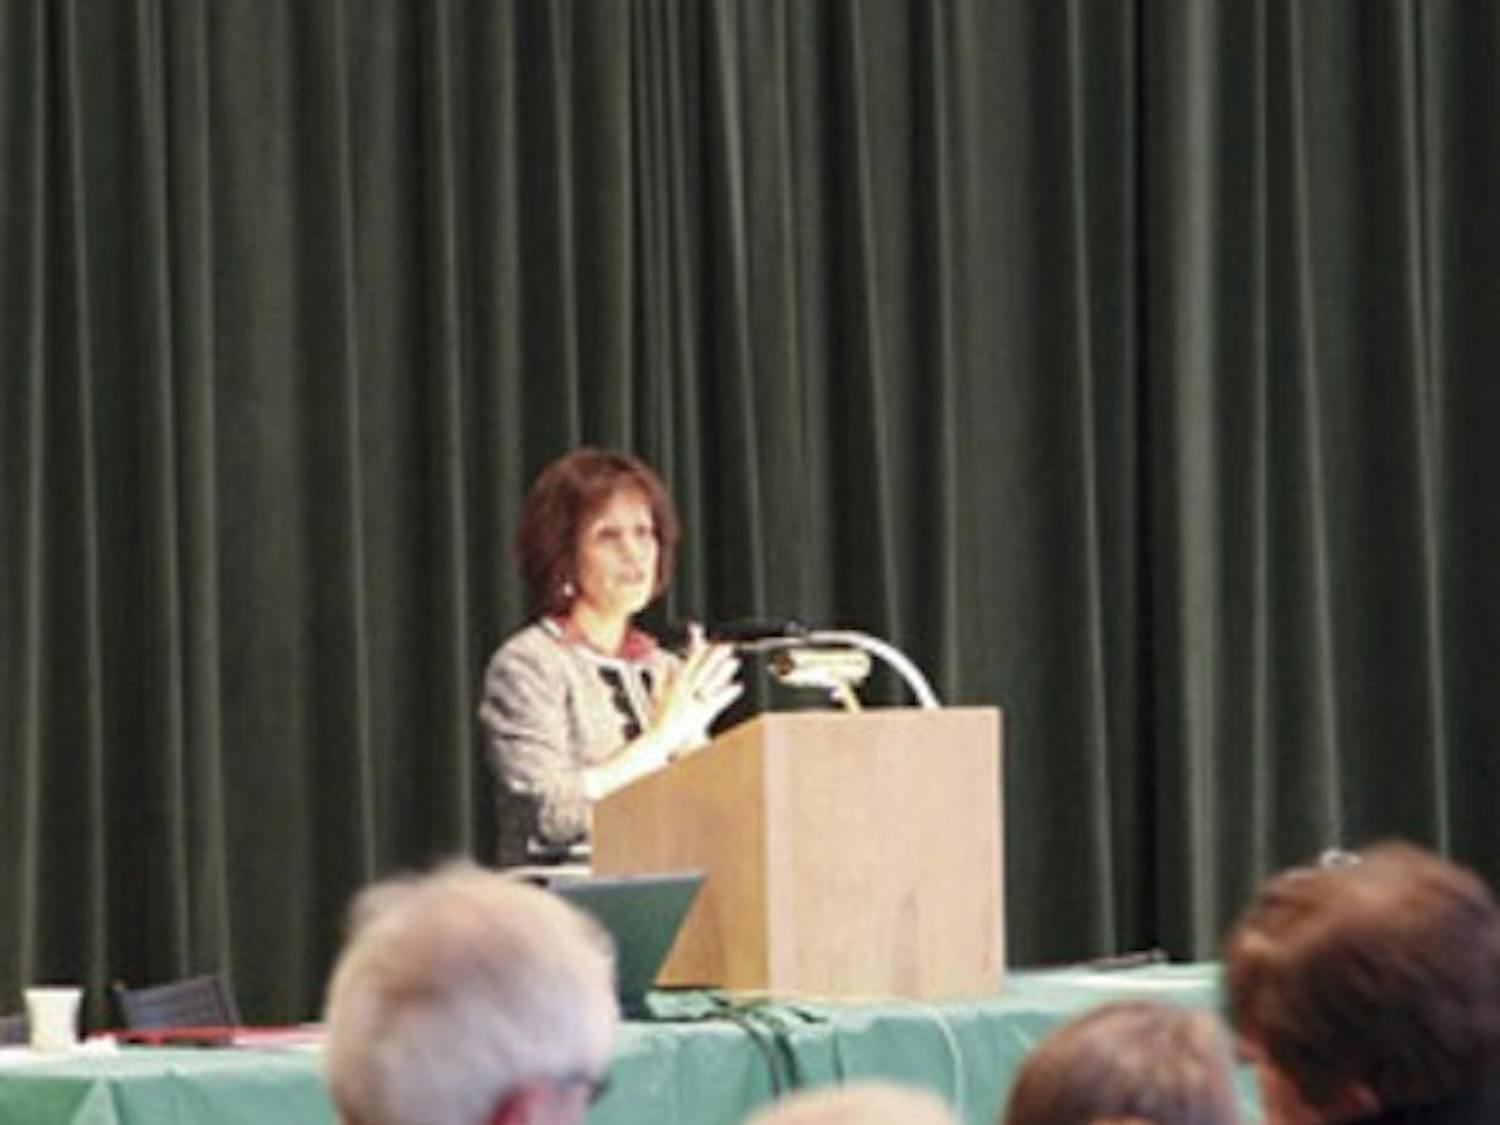 Dean of the Faculty Carol Folt gave her report to the faculty on Monday.